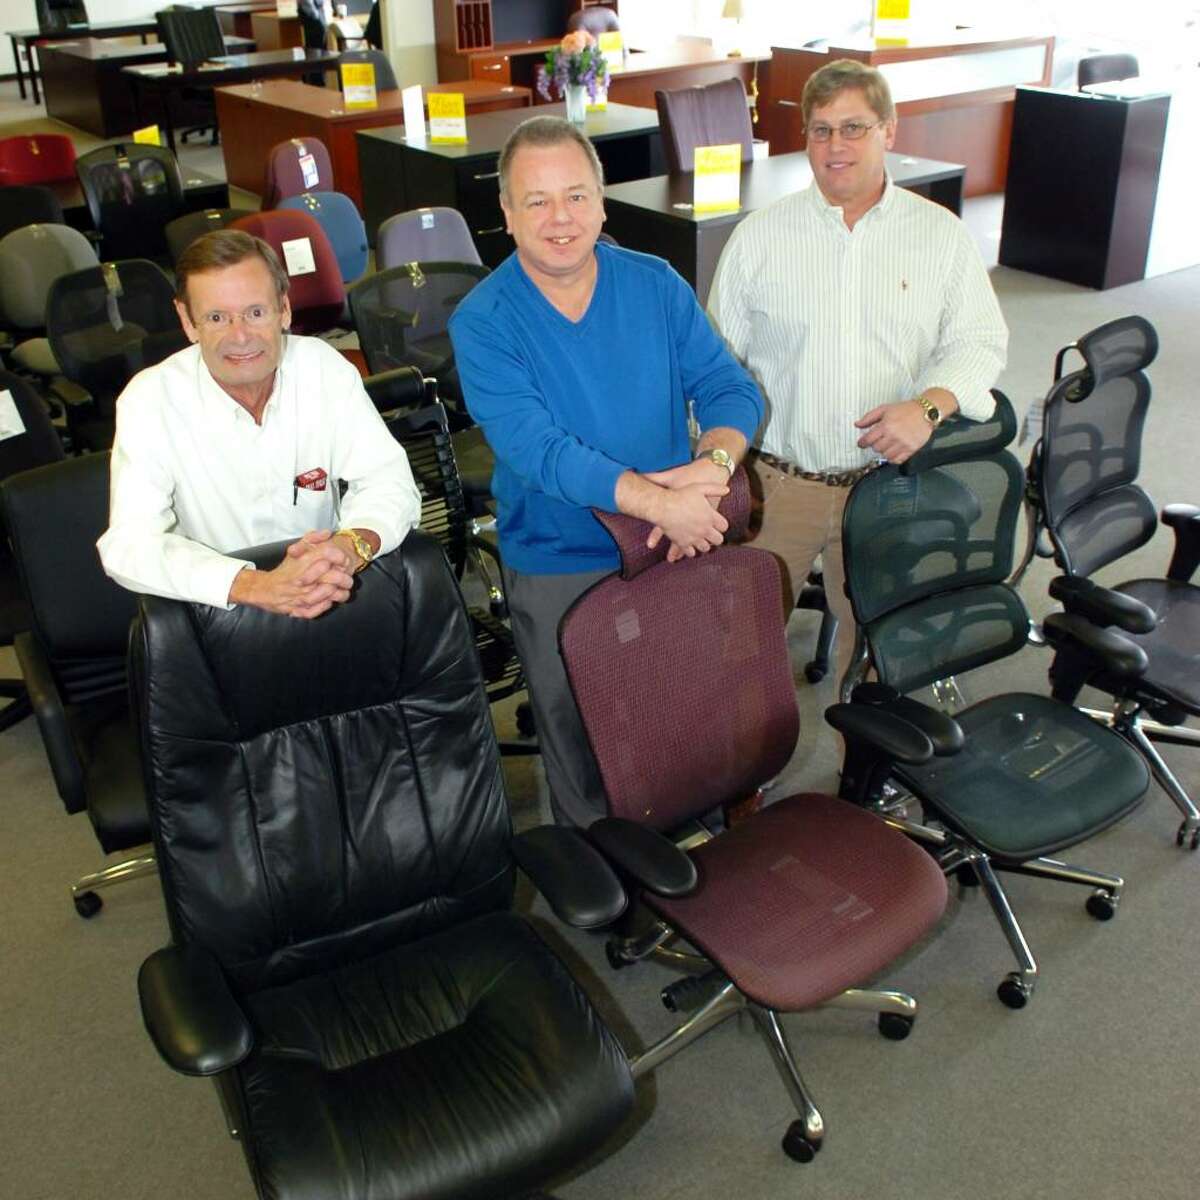 Universal Business Equipment, in Bridgeport, Conn. Jan. 13th, 2010. From left are owners Gill Schoonmaker, Tom Kraebel and Craig Cinder.